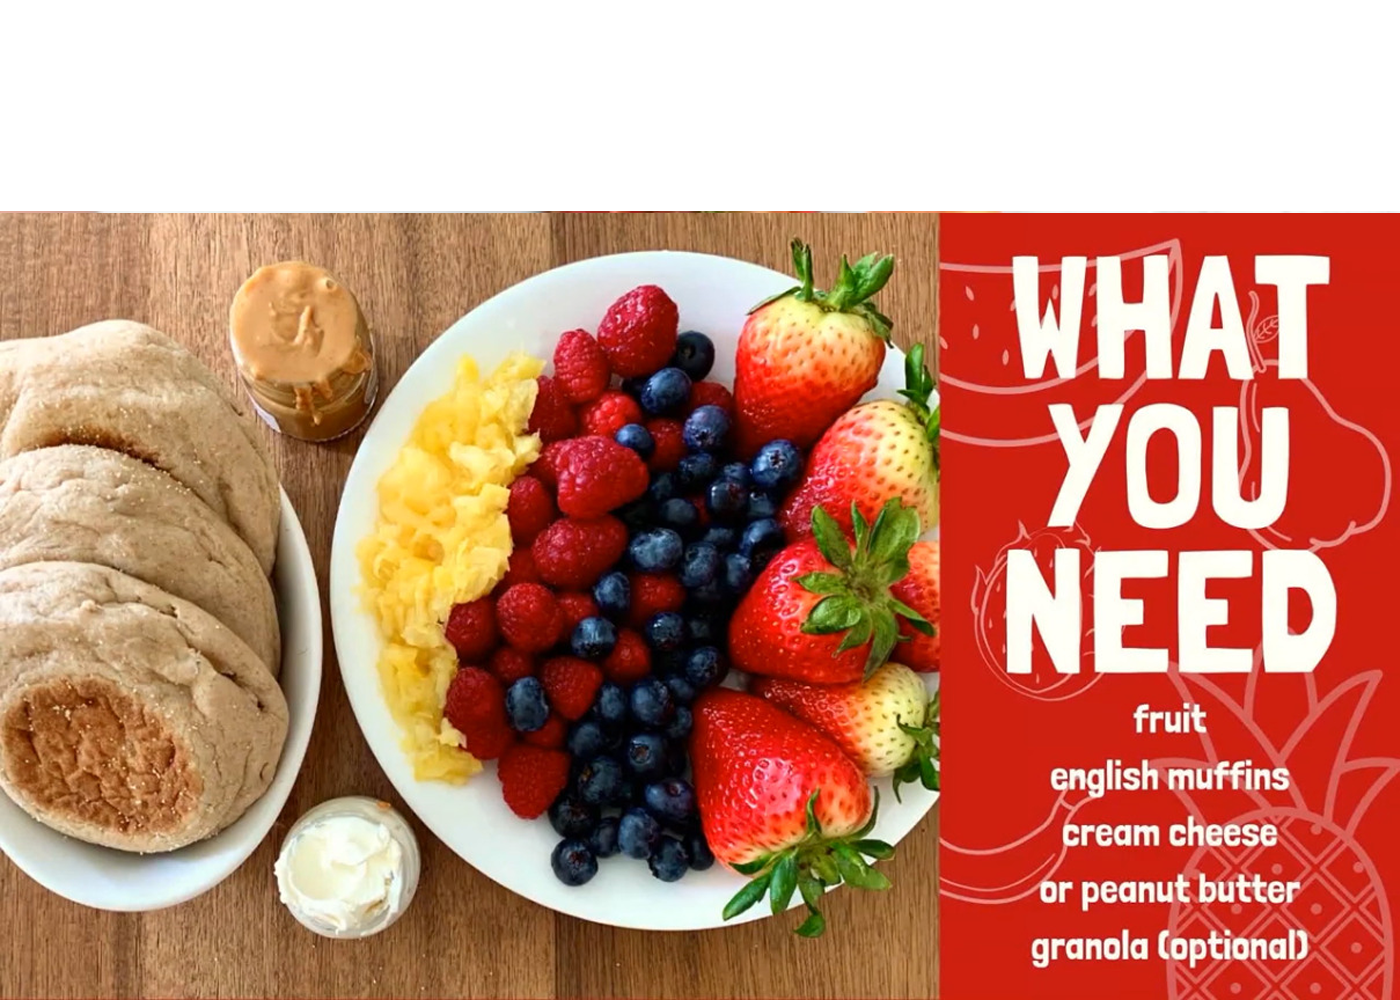 text "What You Need" with a list of ingredients and an image of English Muffins, a plate of fruit and scrambled eggs